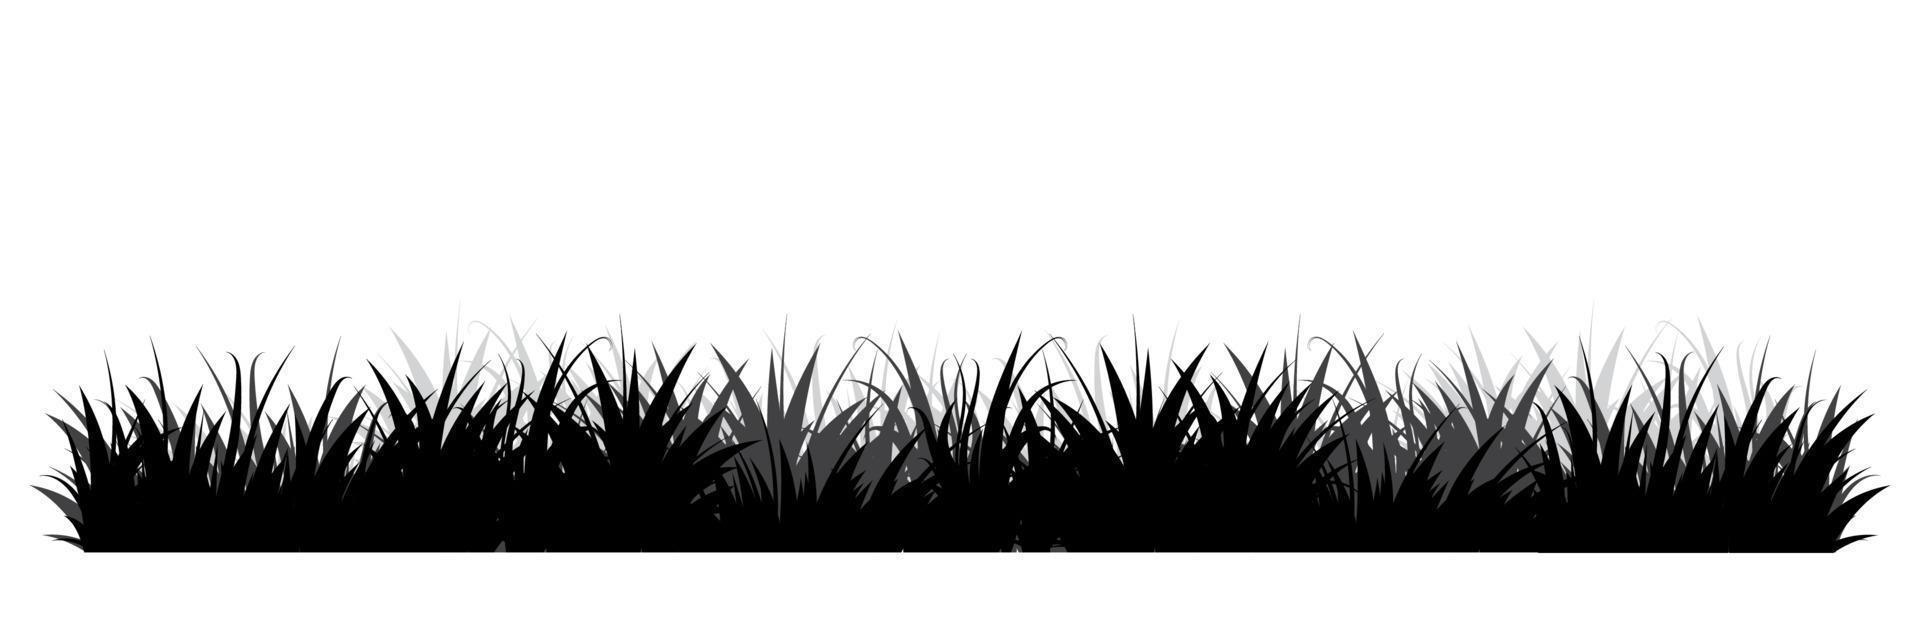 Black silhouettes of grass. Floral background. Wild grass. Grass borders silhouette. Vector illustration